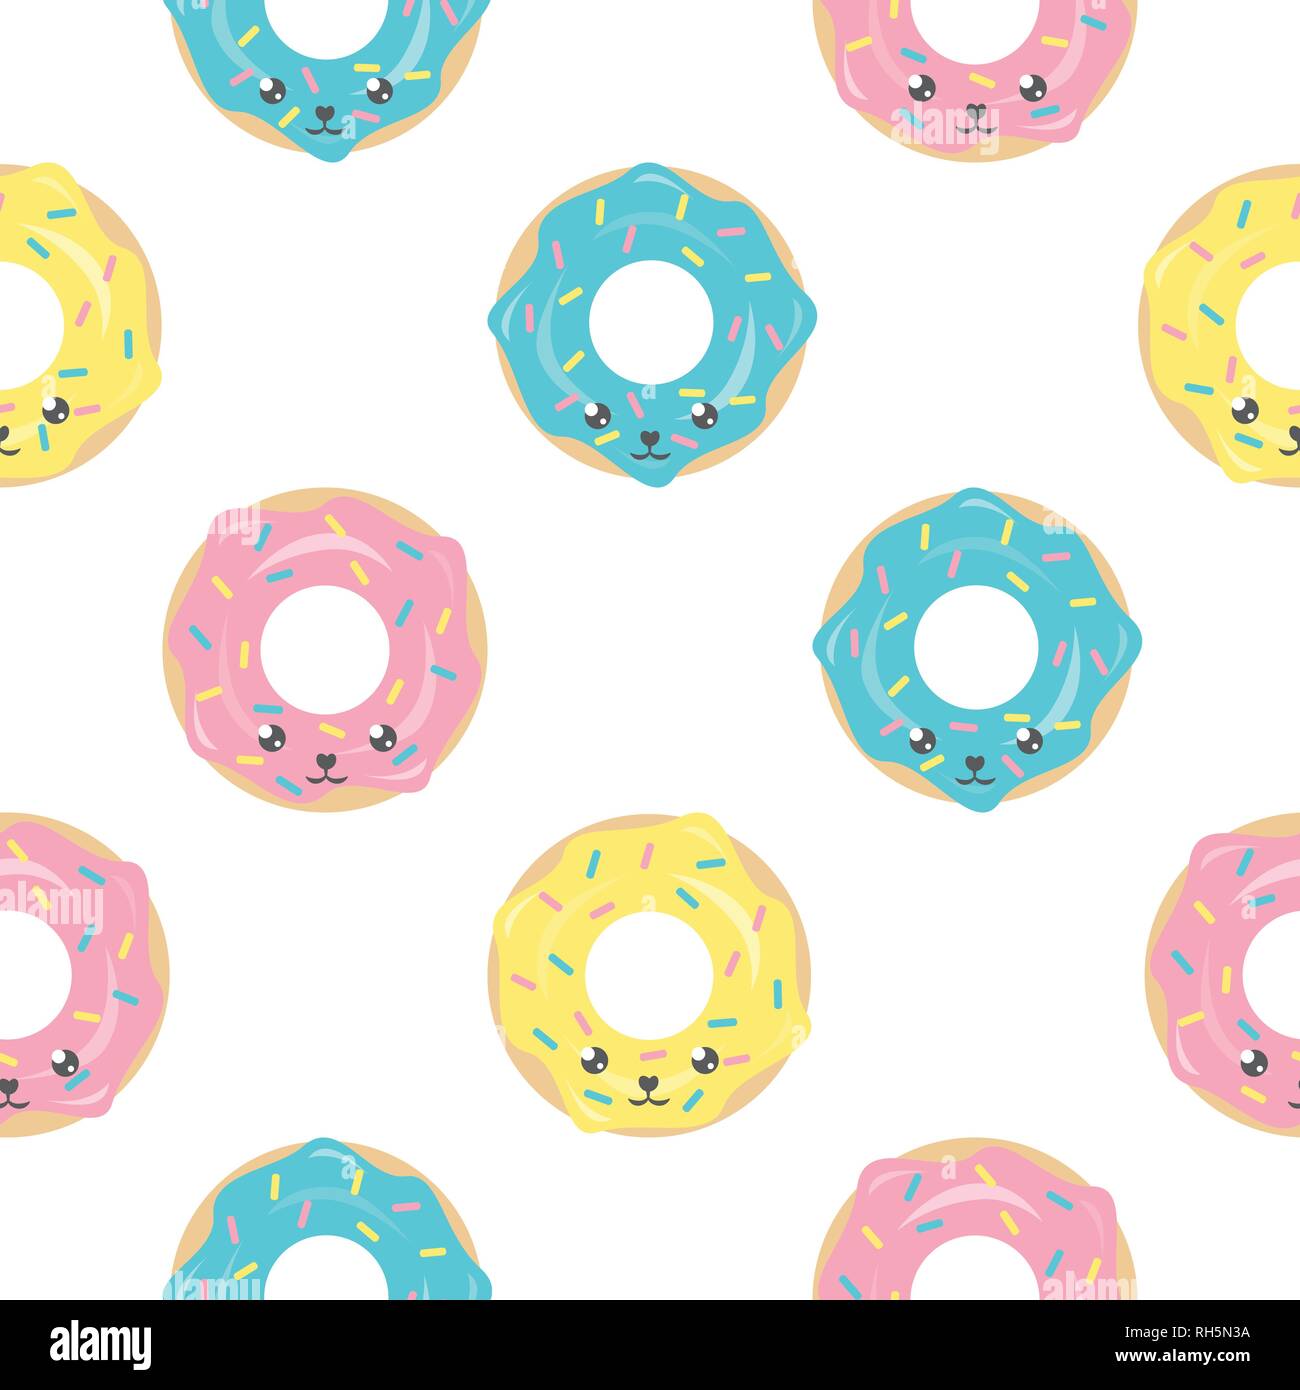 Childish seamless pattern with cute kawaii donuts. Creative texture for textile, wallpaper, fabric, decor Stock Vector